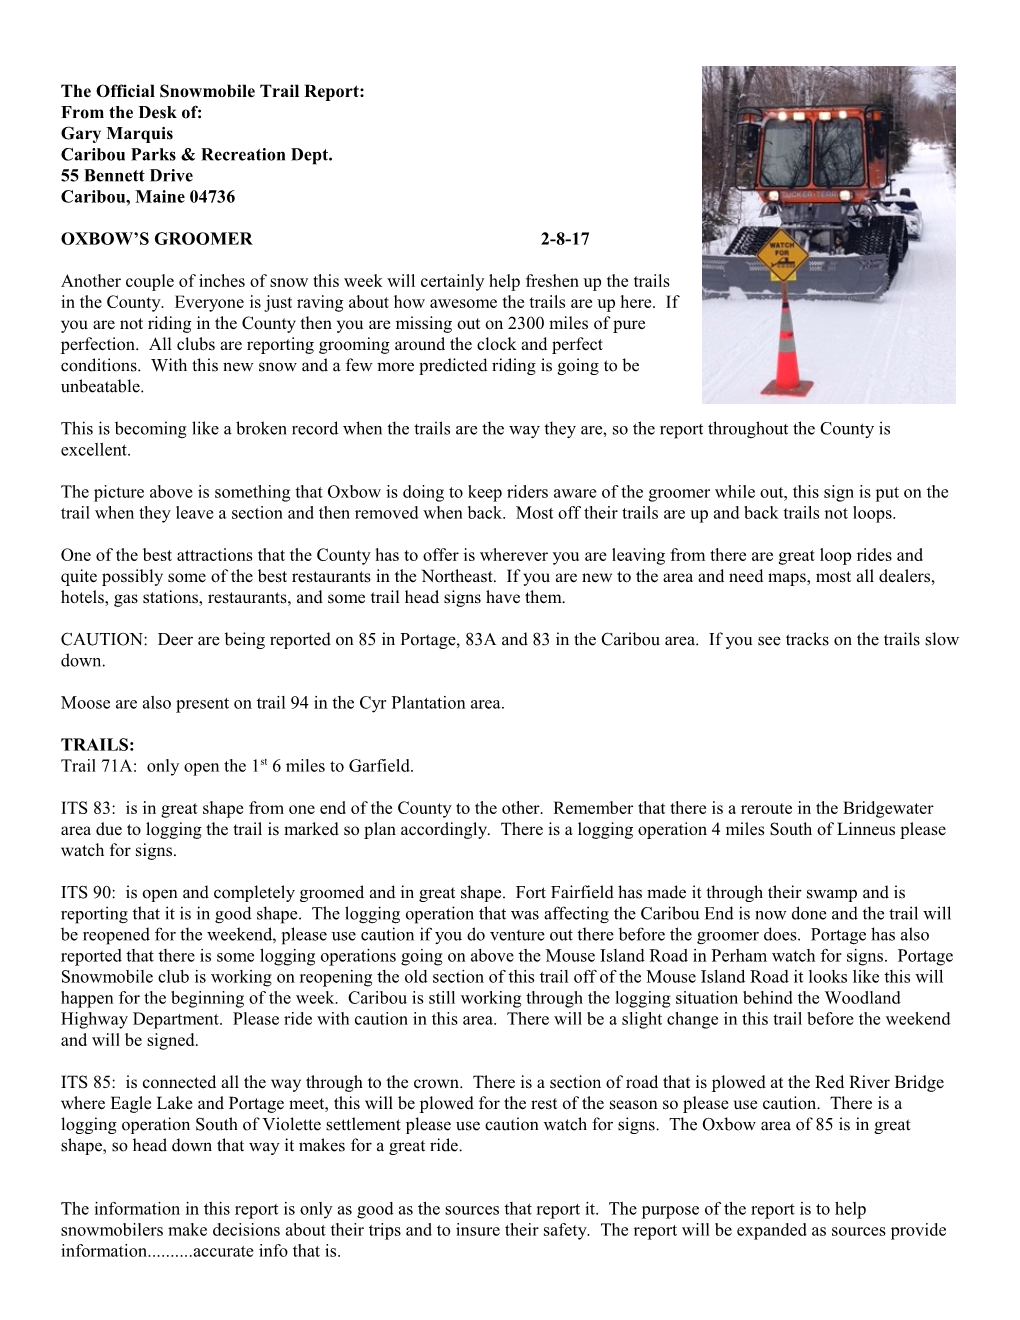 The Official Snowmobile Trail Report